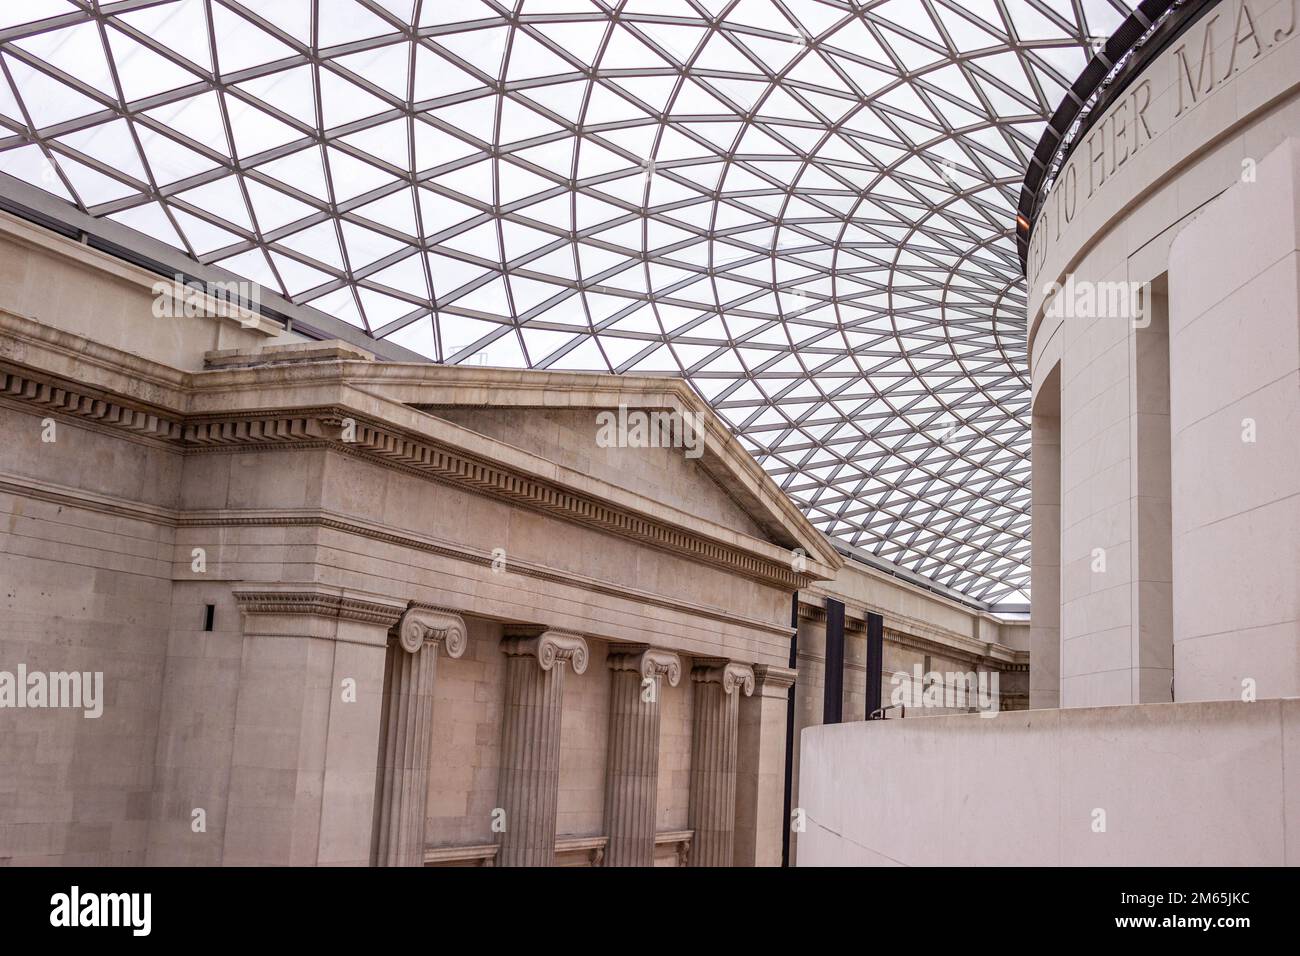 Interior view of the Great Court at the British Museum, a public museum dedicated to human history, art and culture in London. Stock Photo